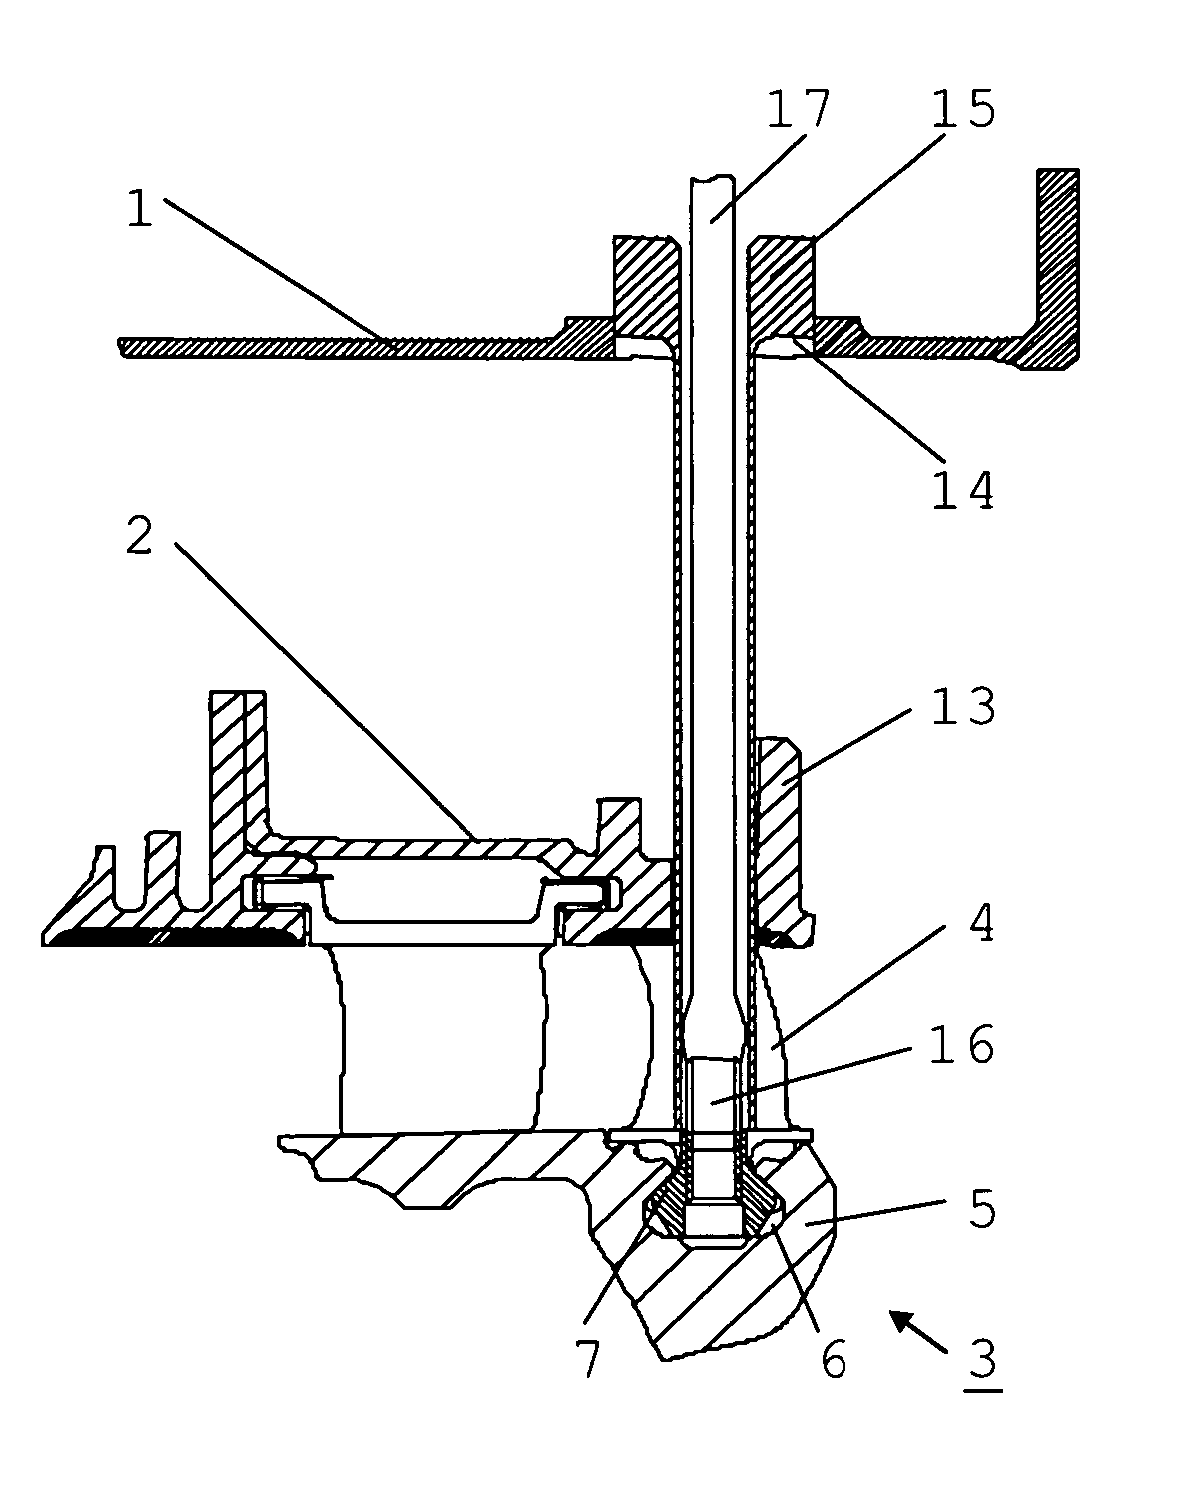 Arrangement for precision balancing the rotor of a gas turbine engine